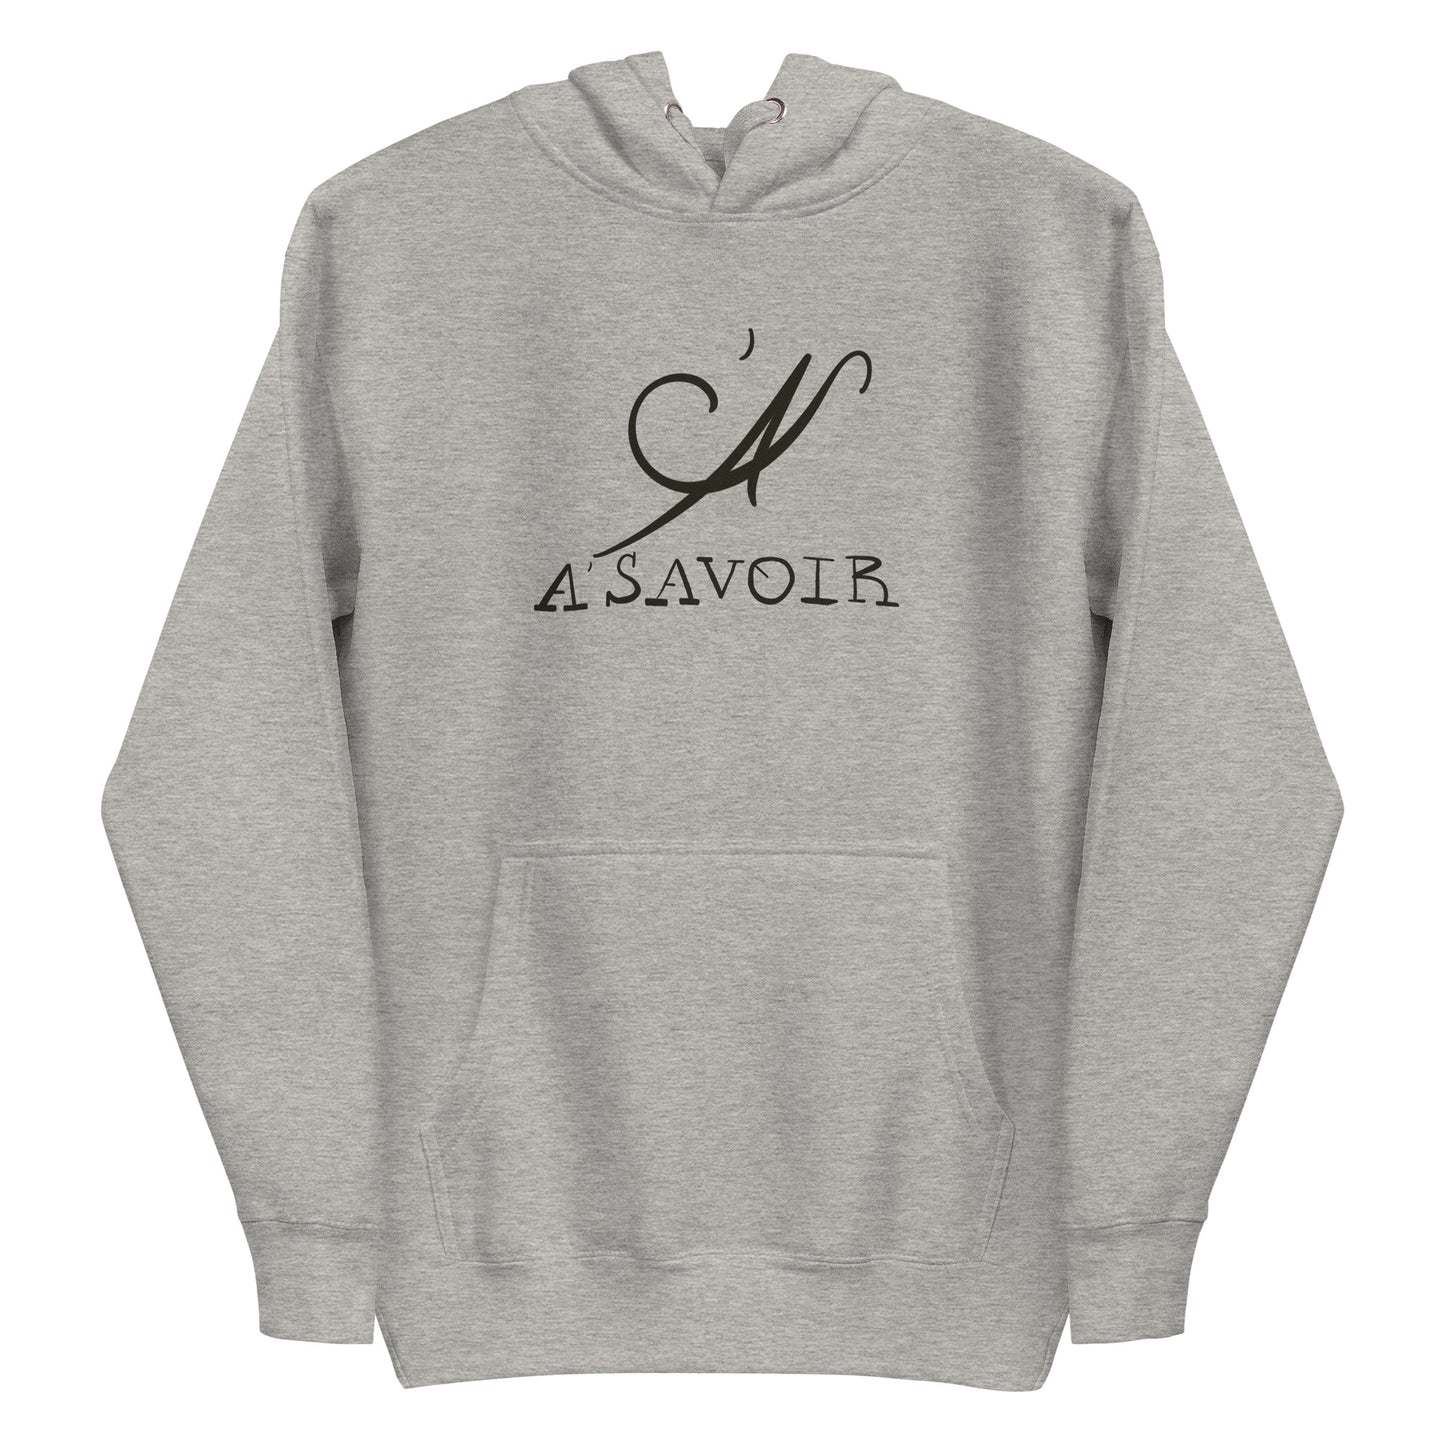 A'Savoir Hoodie - "Go Disappoint"